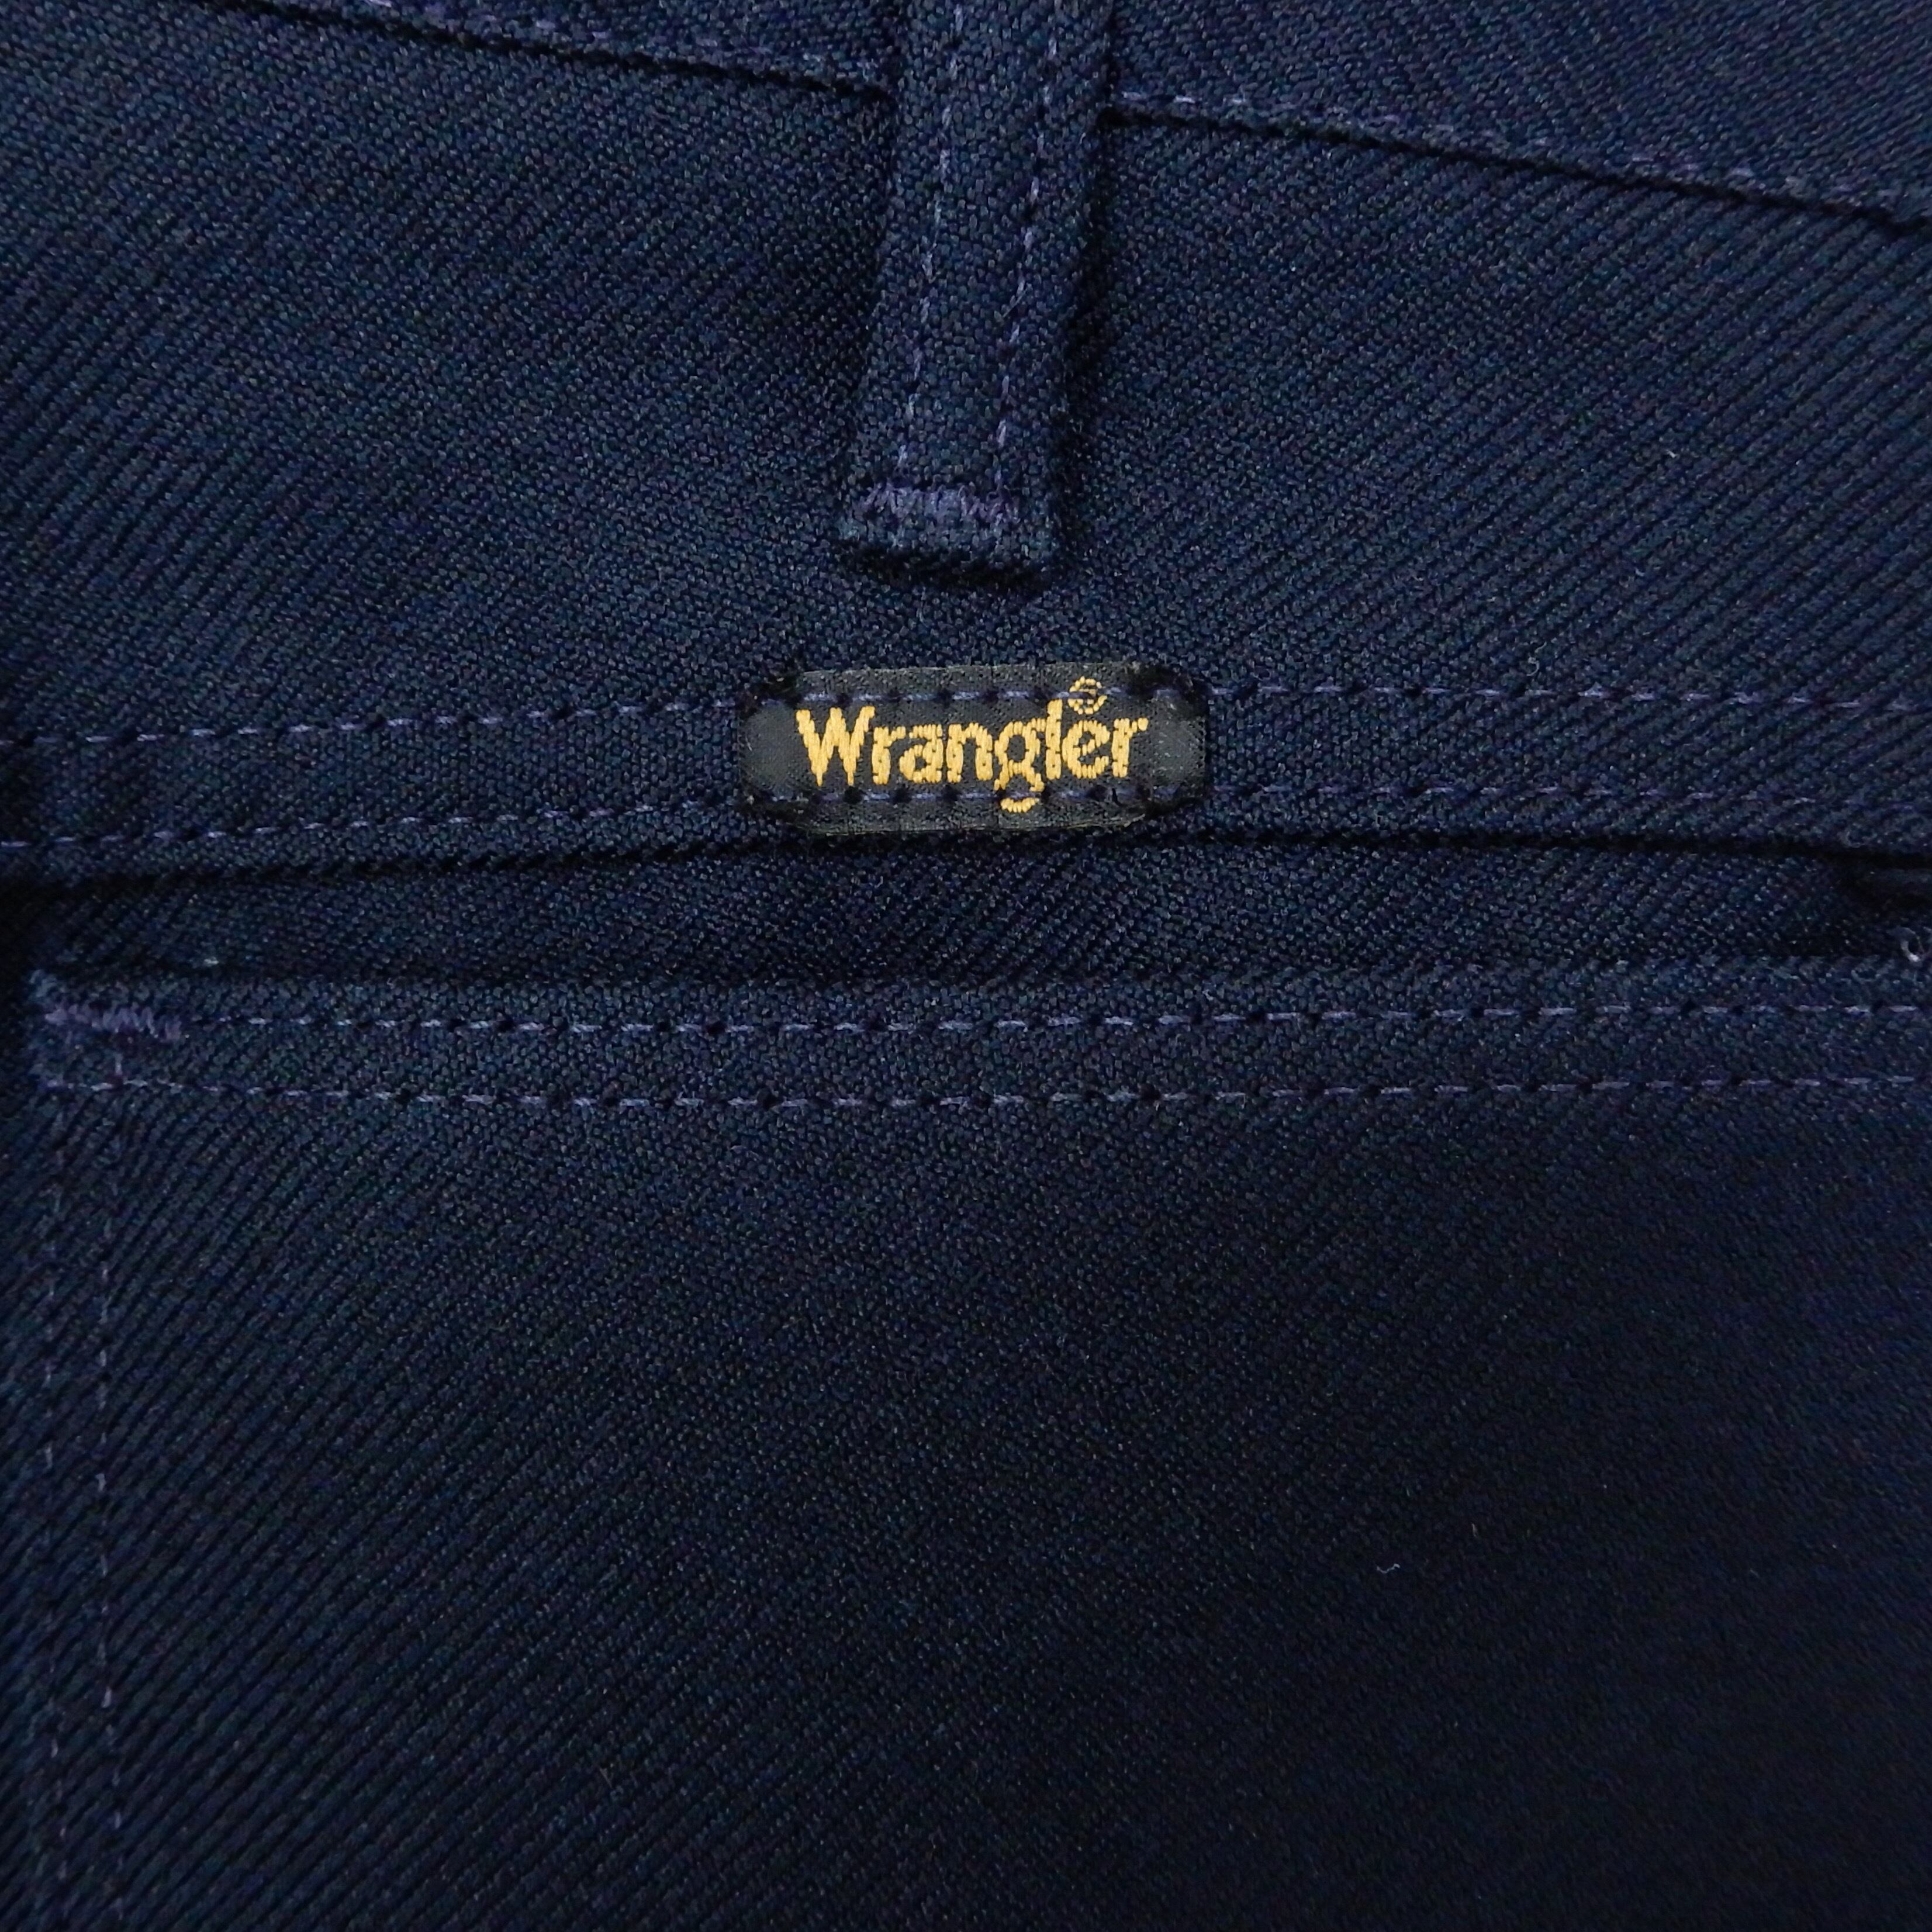 Wrangler 82NV WRANCHER PANTS MADE IN USA 1990s W32 L30